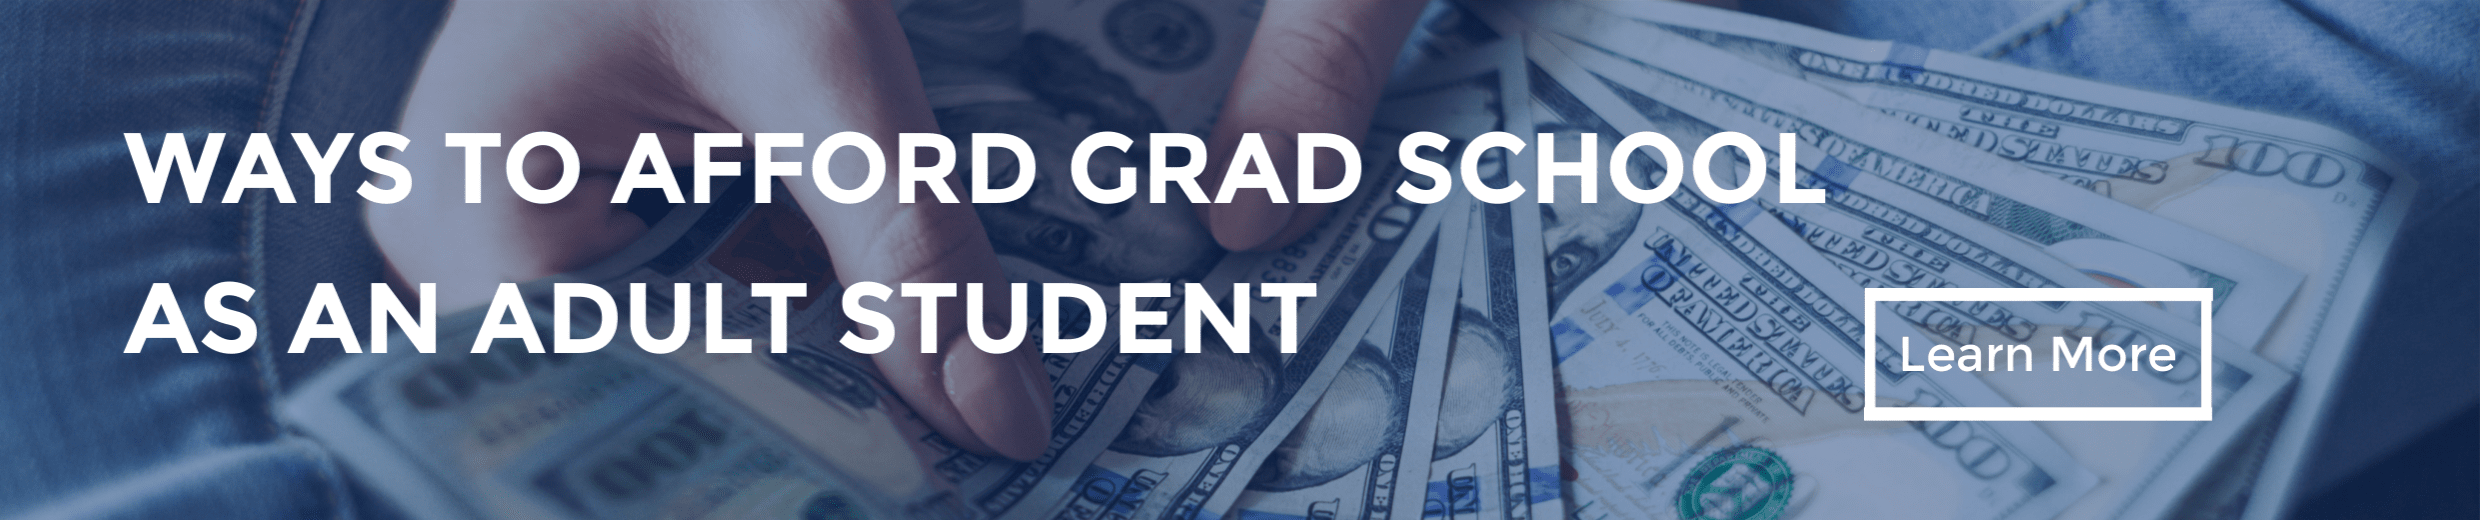 Ways to Afford Grad School as an Adult Student